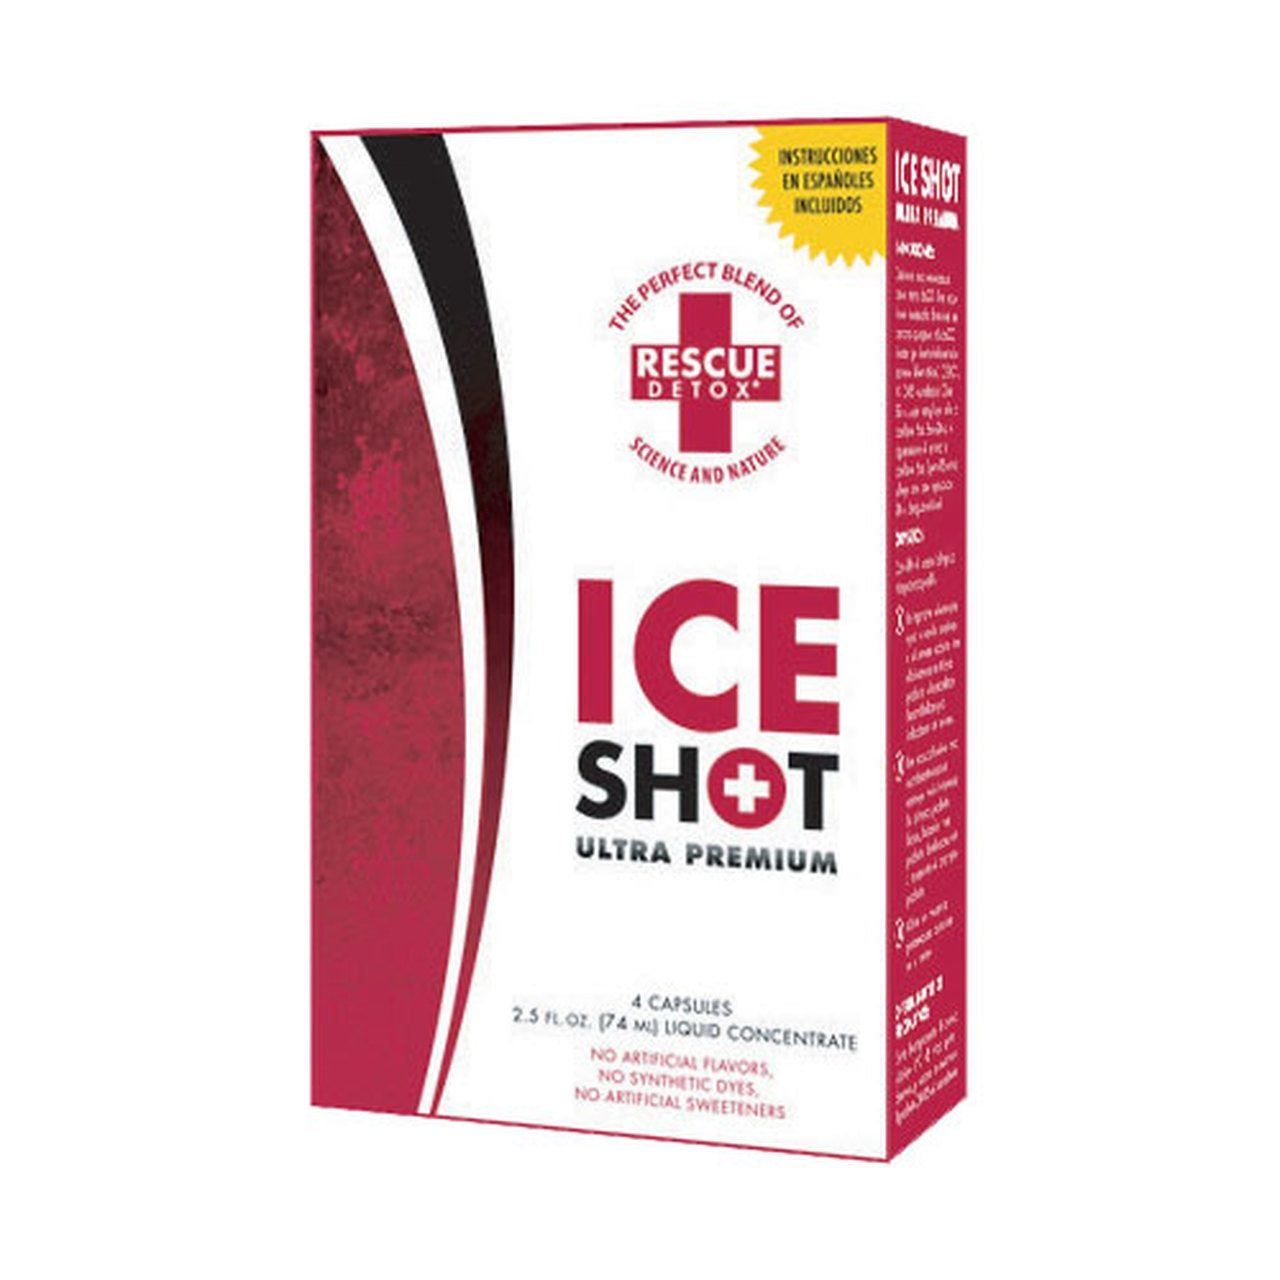 Rescue Detox ICE Shot Flower Power Packages 